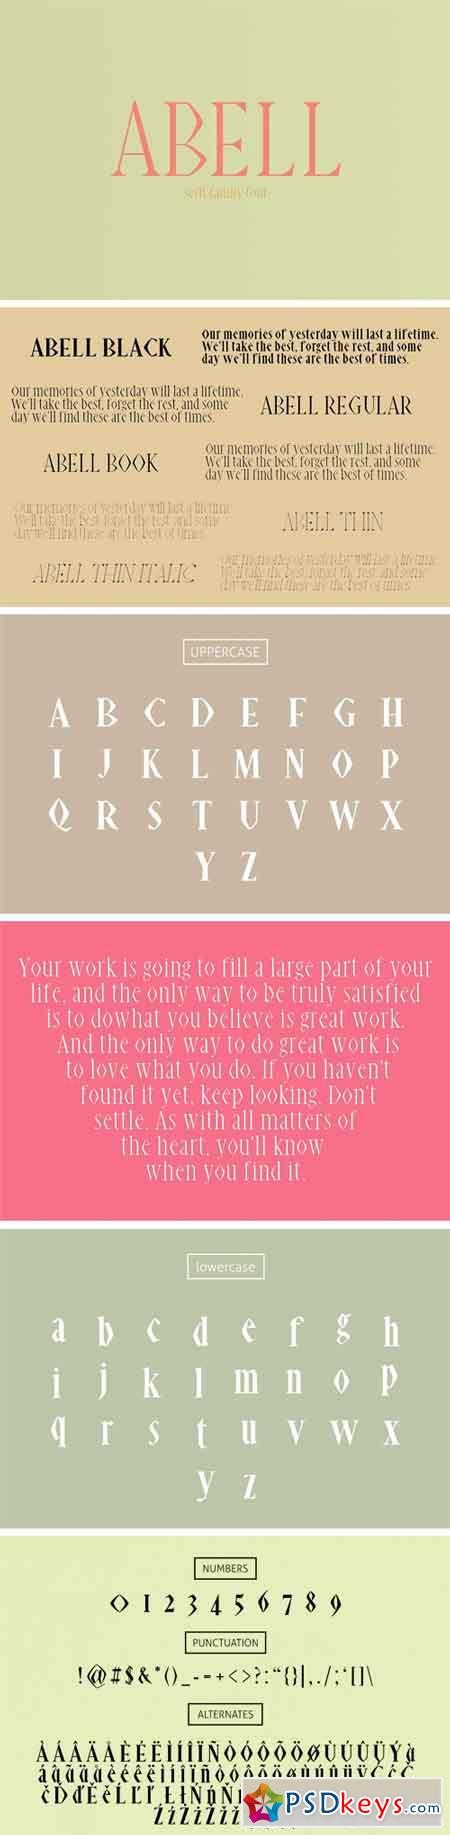 Abell Font Pack 1296682